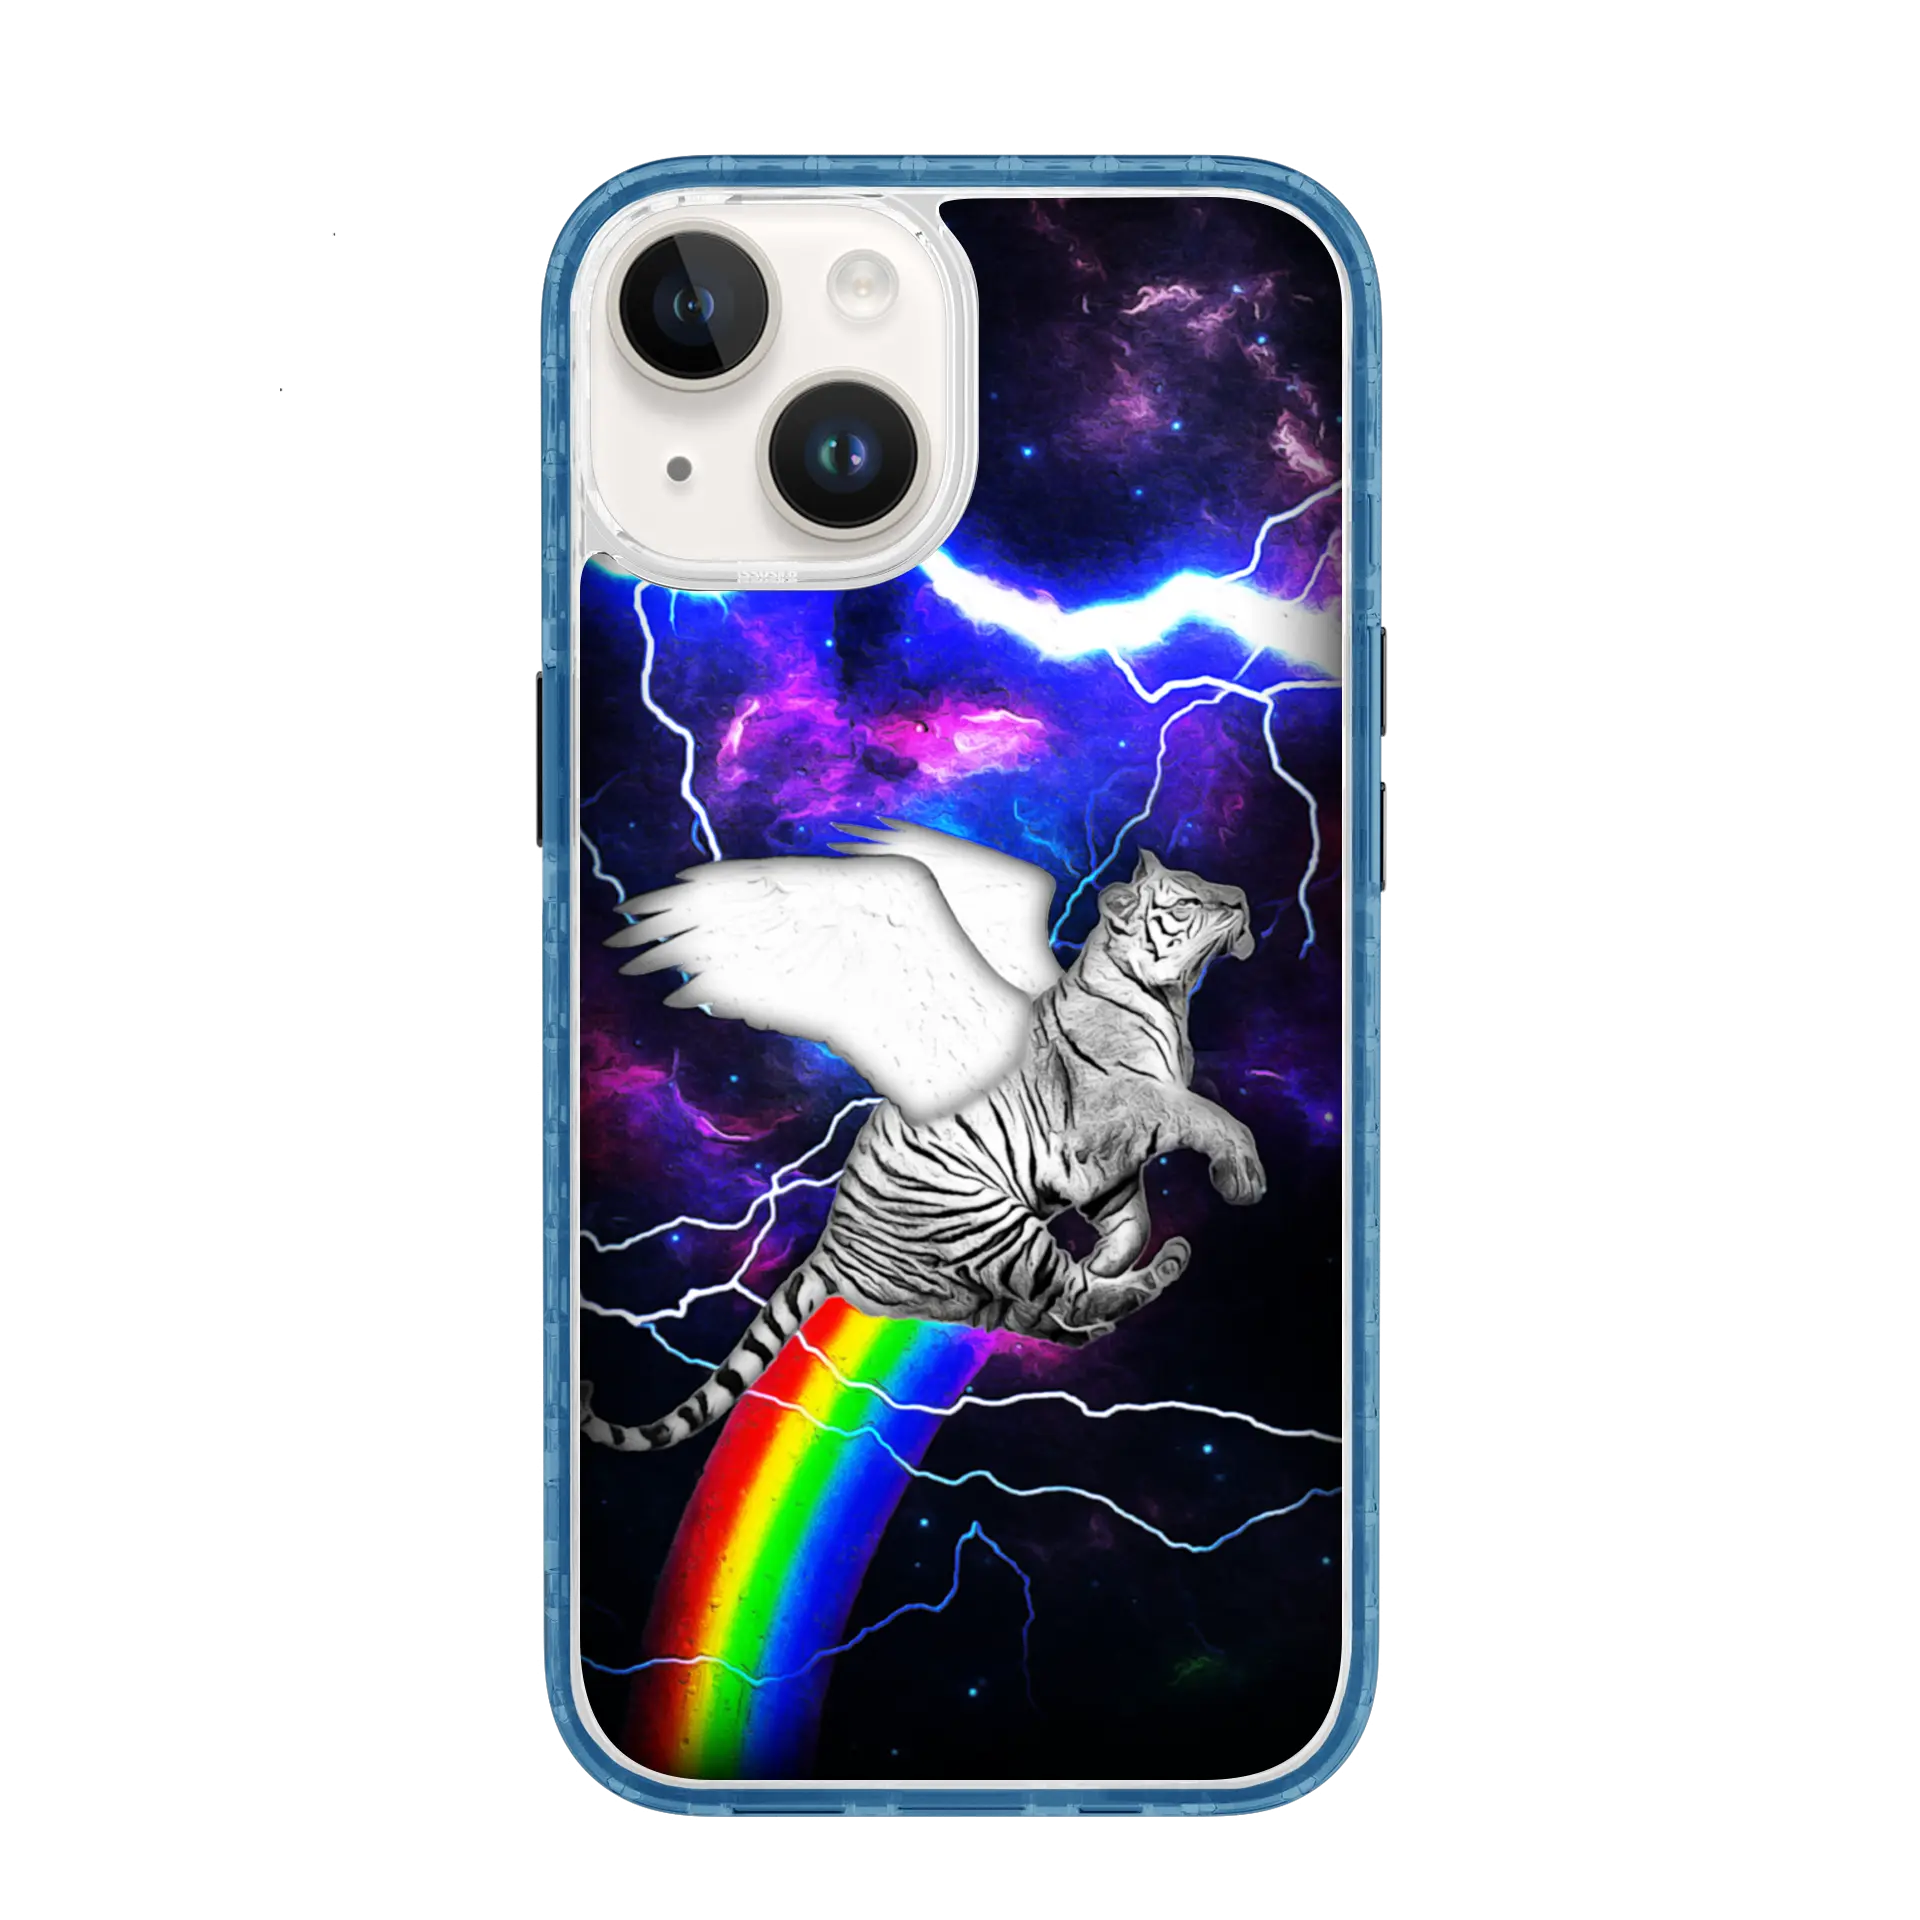 AppleiPhone14DeepSeaBlue Flight and Fury | Wizards & Wyrms Series | Custom MagSafe Case Design for Apple iPhone 14 Series cellhelmet cellhelmet